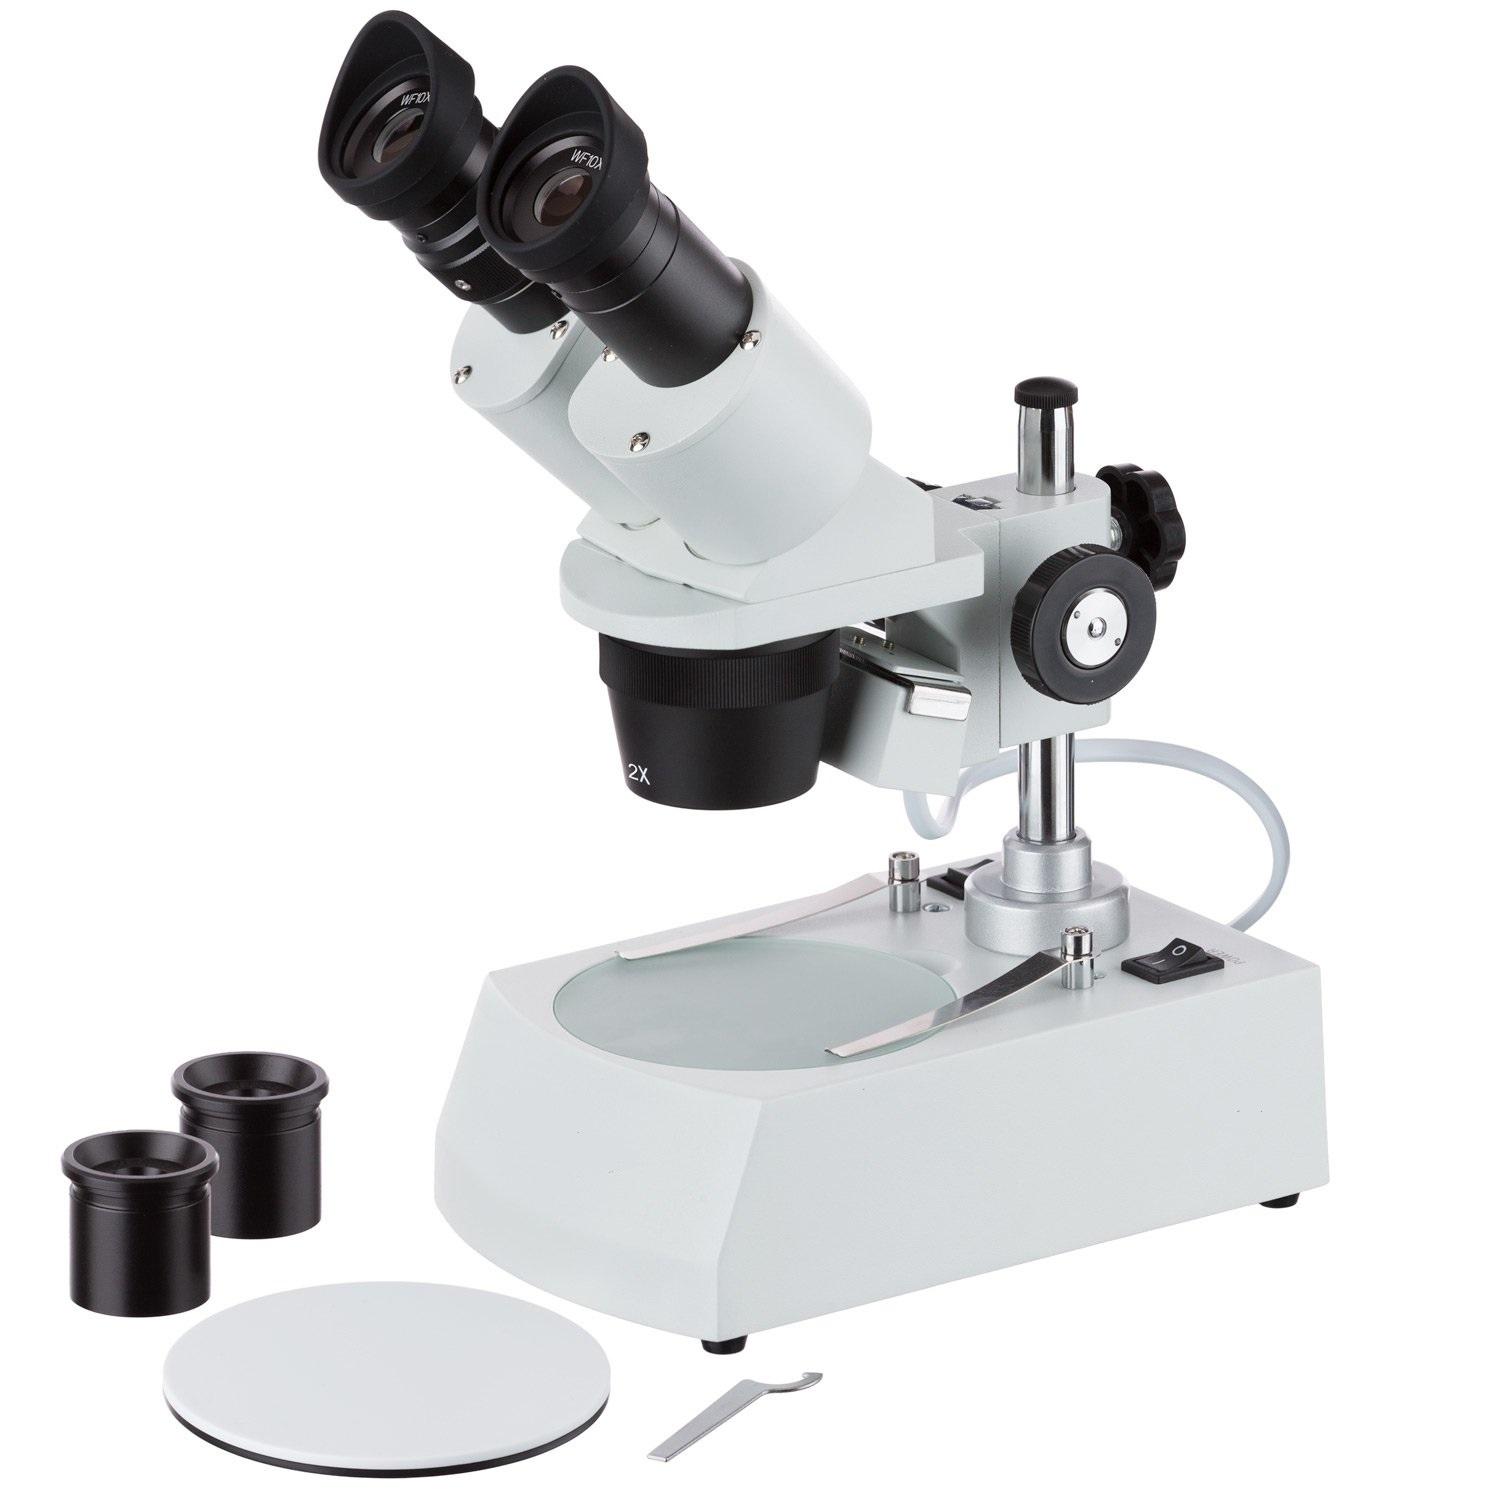 Advanced Stereo Microscope (30X & 60X Magnification) - Rechargeable